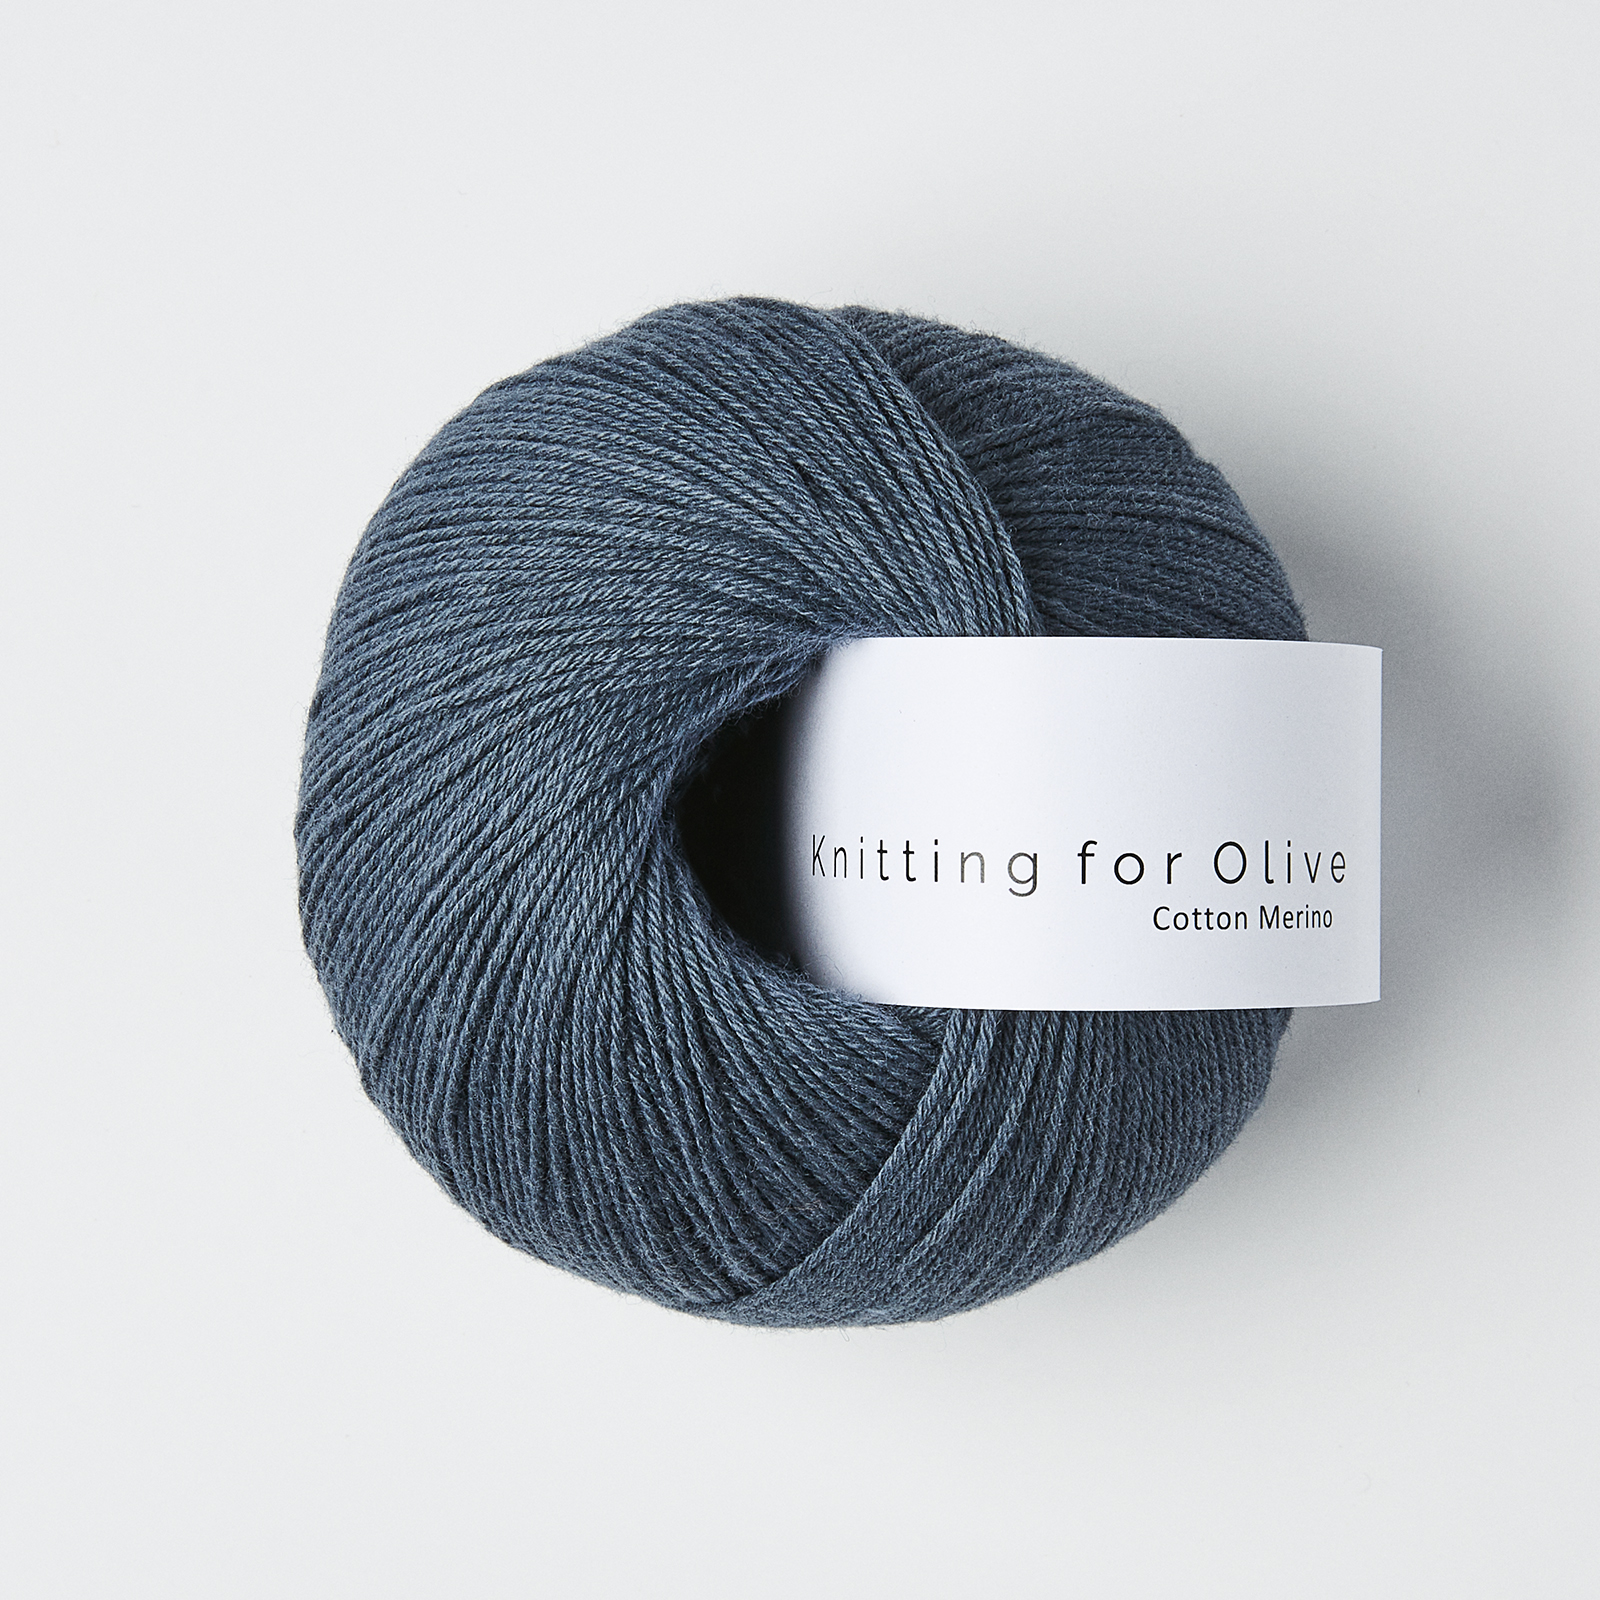 cotton merino knitting for olive | cotton merino: dusty blue whale